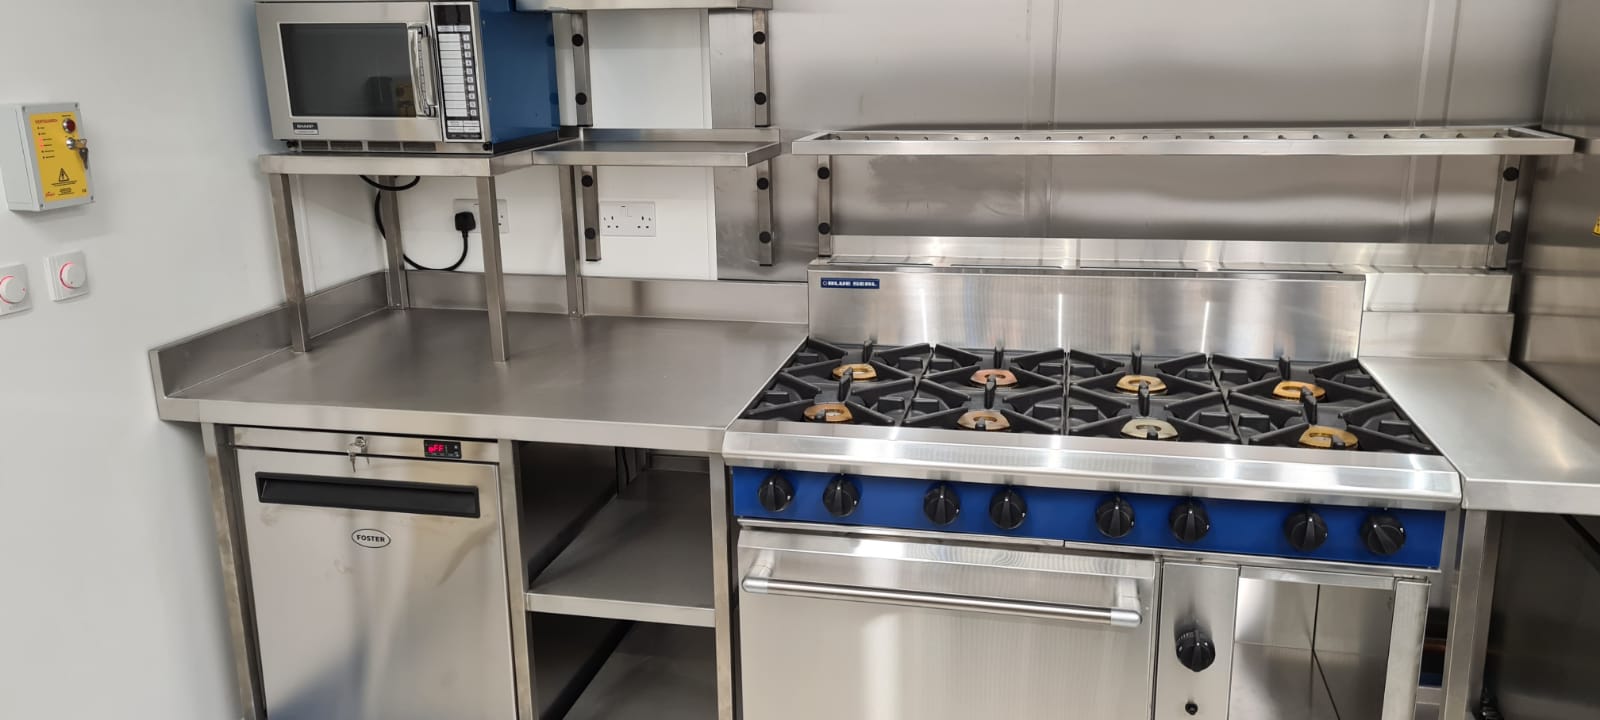 All Change The Importance of Commercial Kitchen Design ...